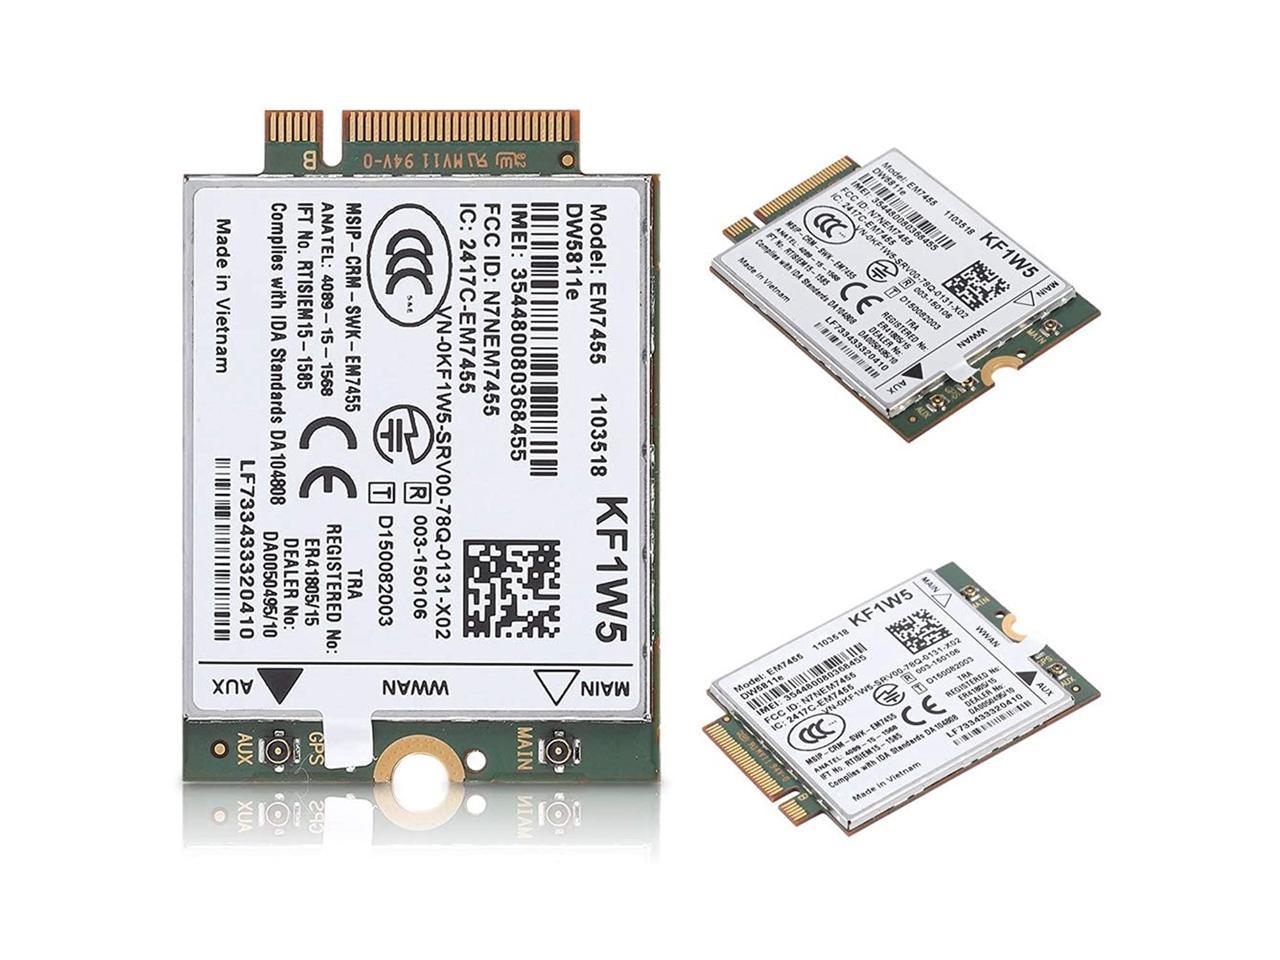 EM7455 Card 300 Mbps Max Download Speed Wireless 4G LTE WWAN NGFF Module for Dell Latitude Series 50 Mbps Max Upload Speed